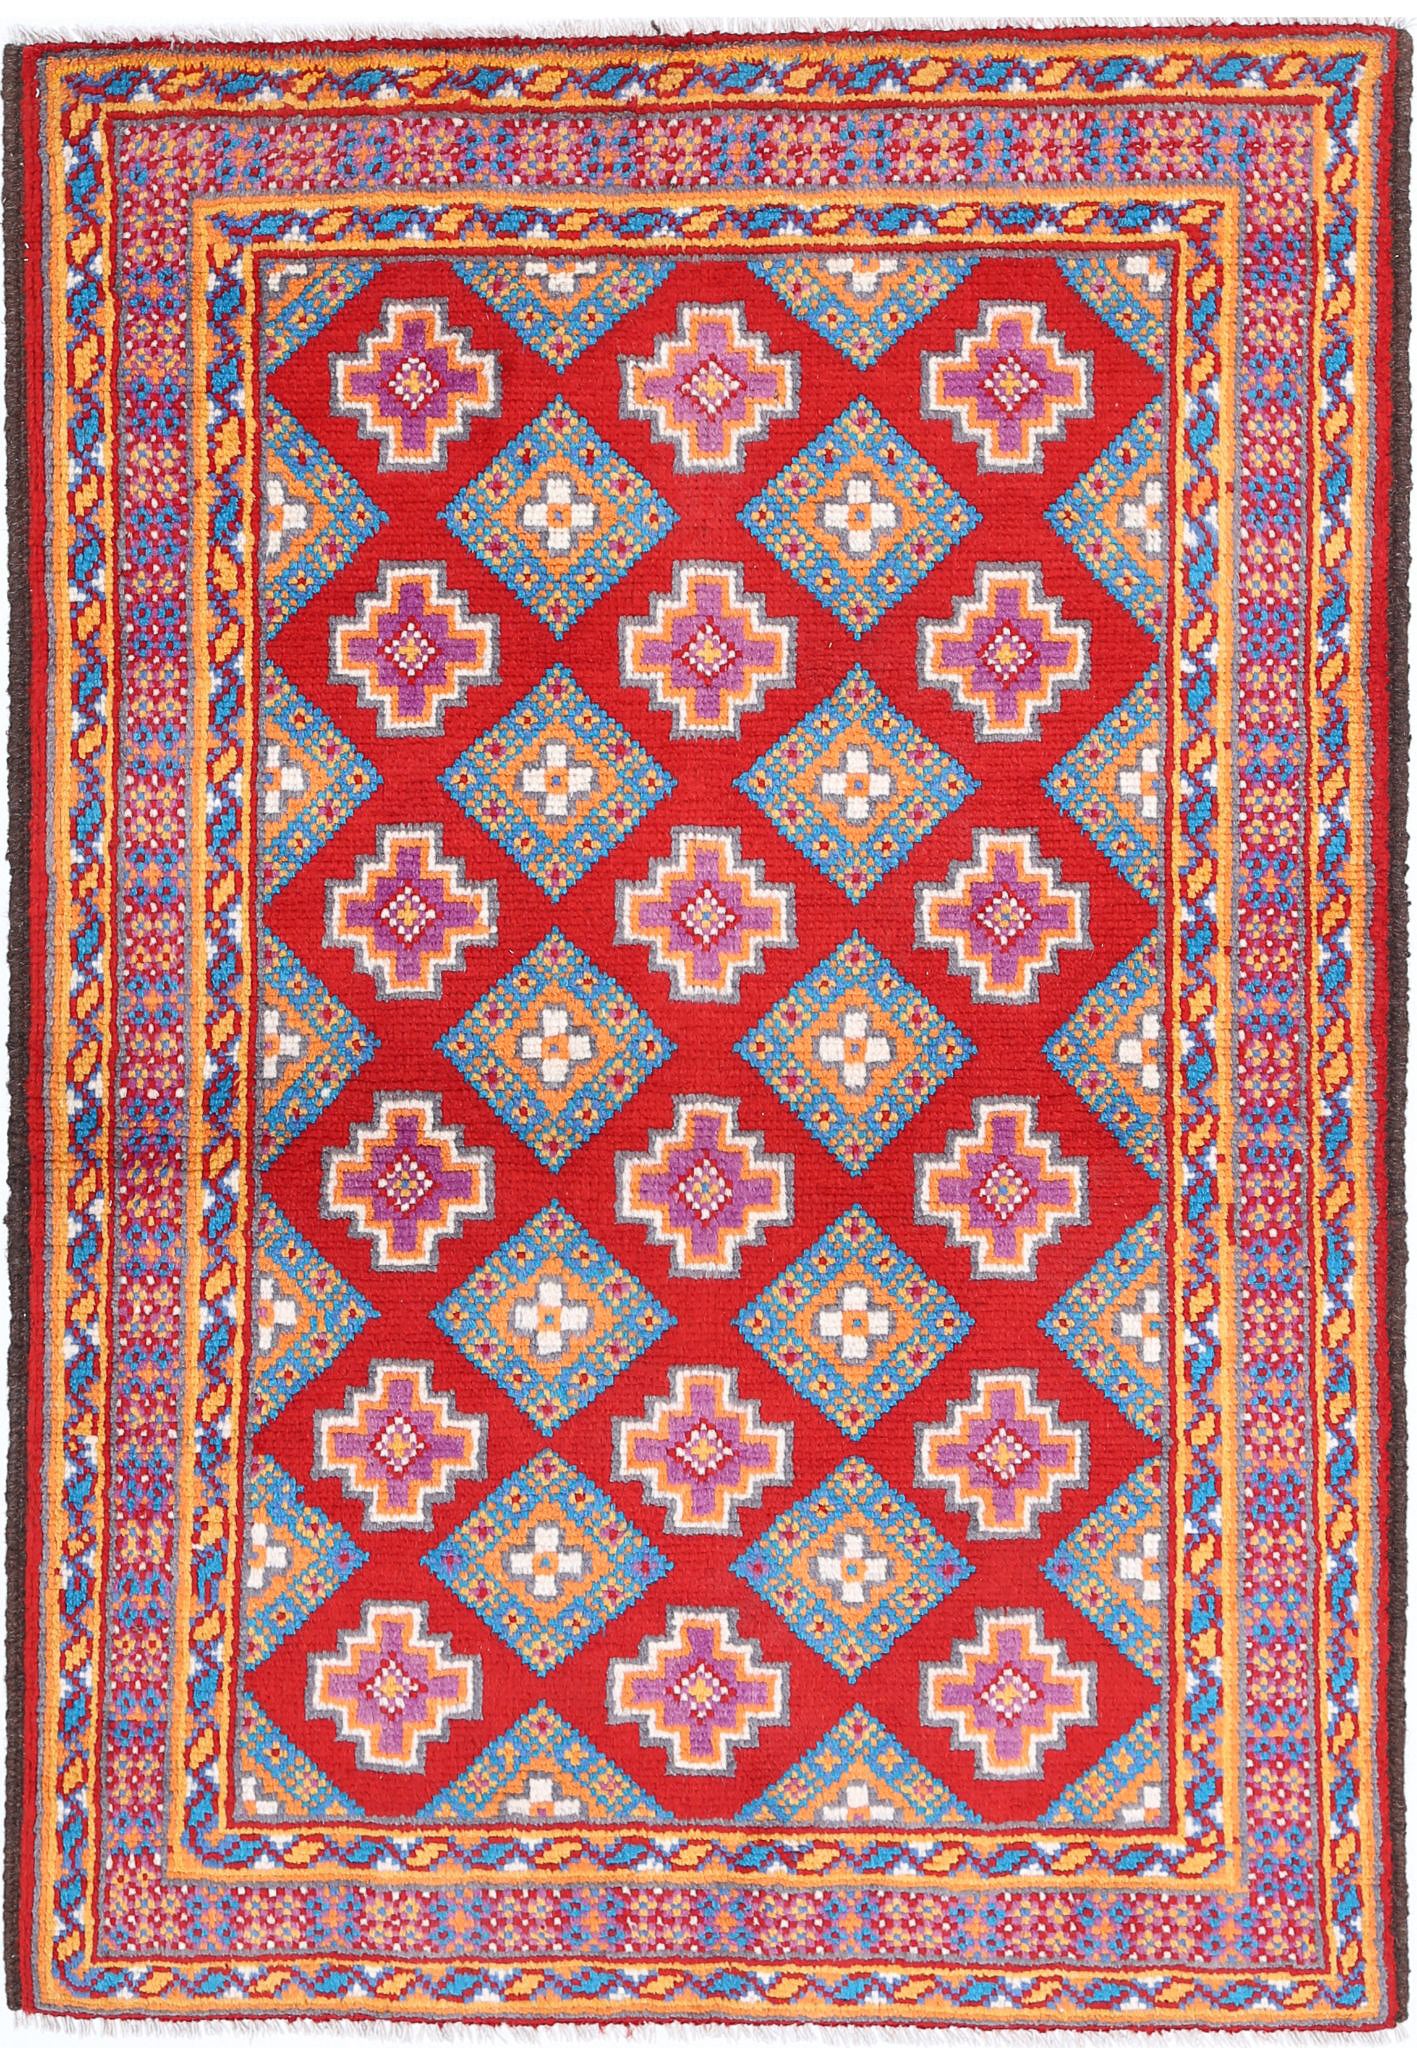 Revival-hand-knotted-qarghani-wool-rug-5014059.jpg